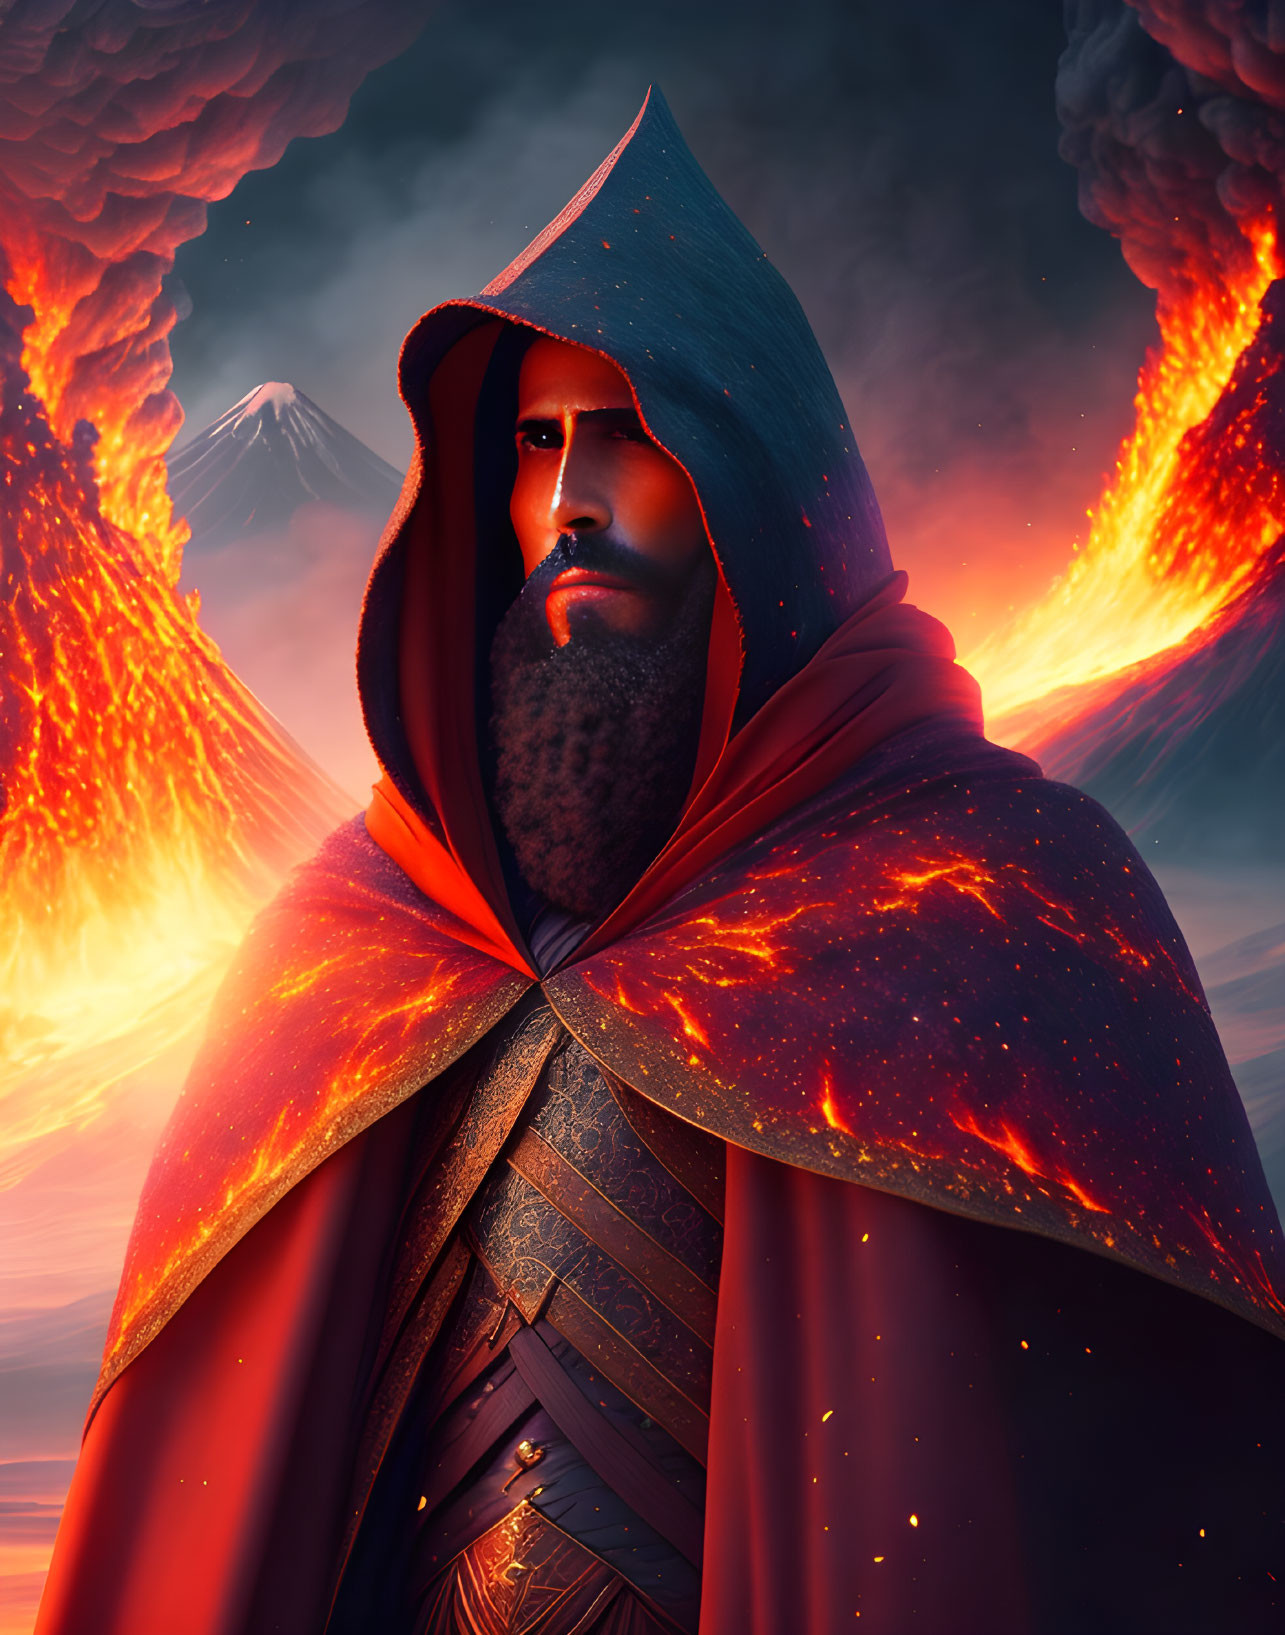 Bearded man in red cloak with volcano background